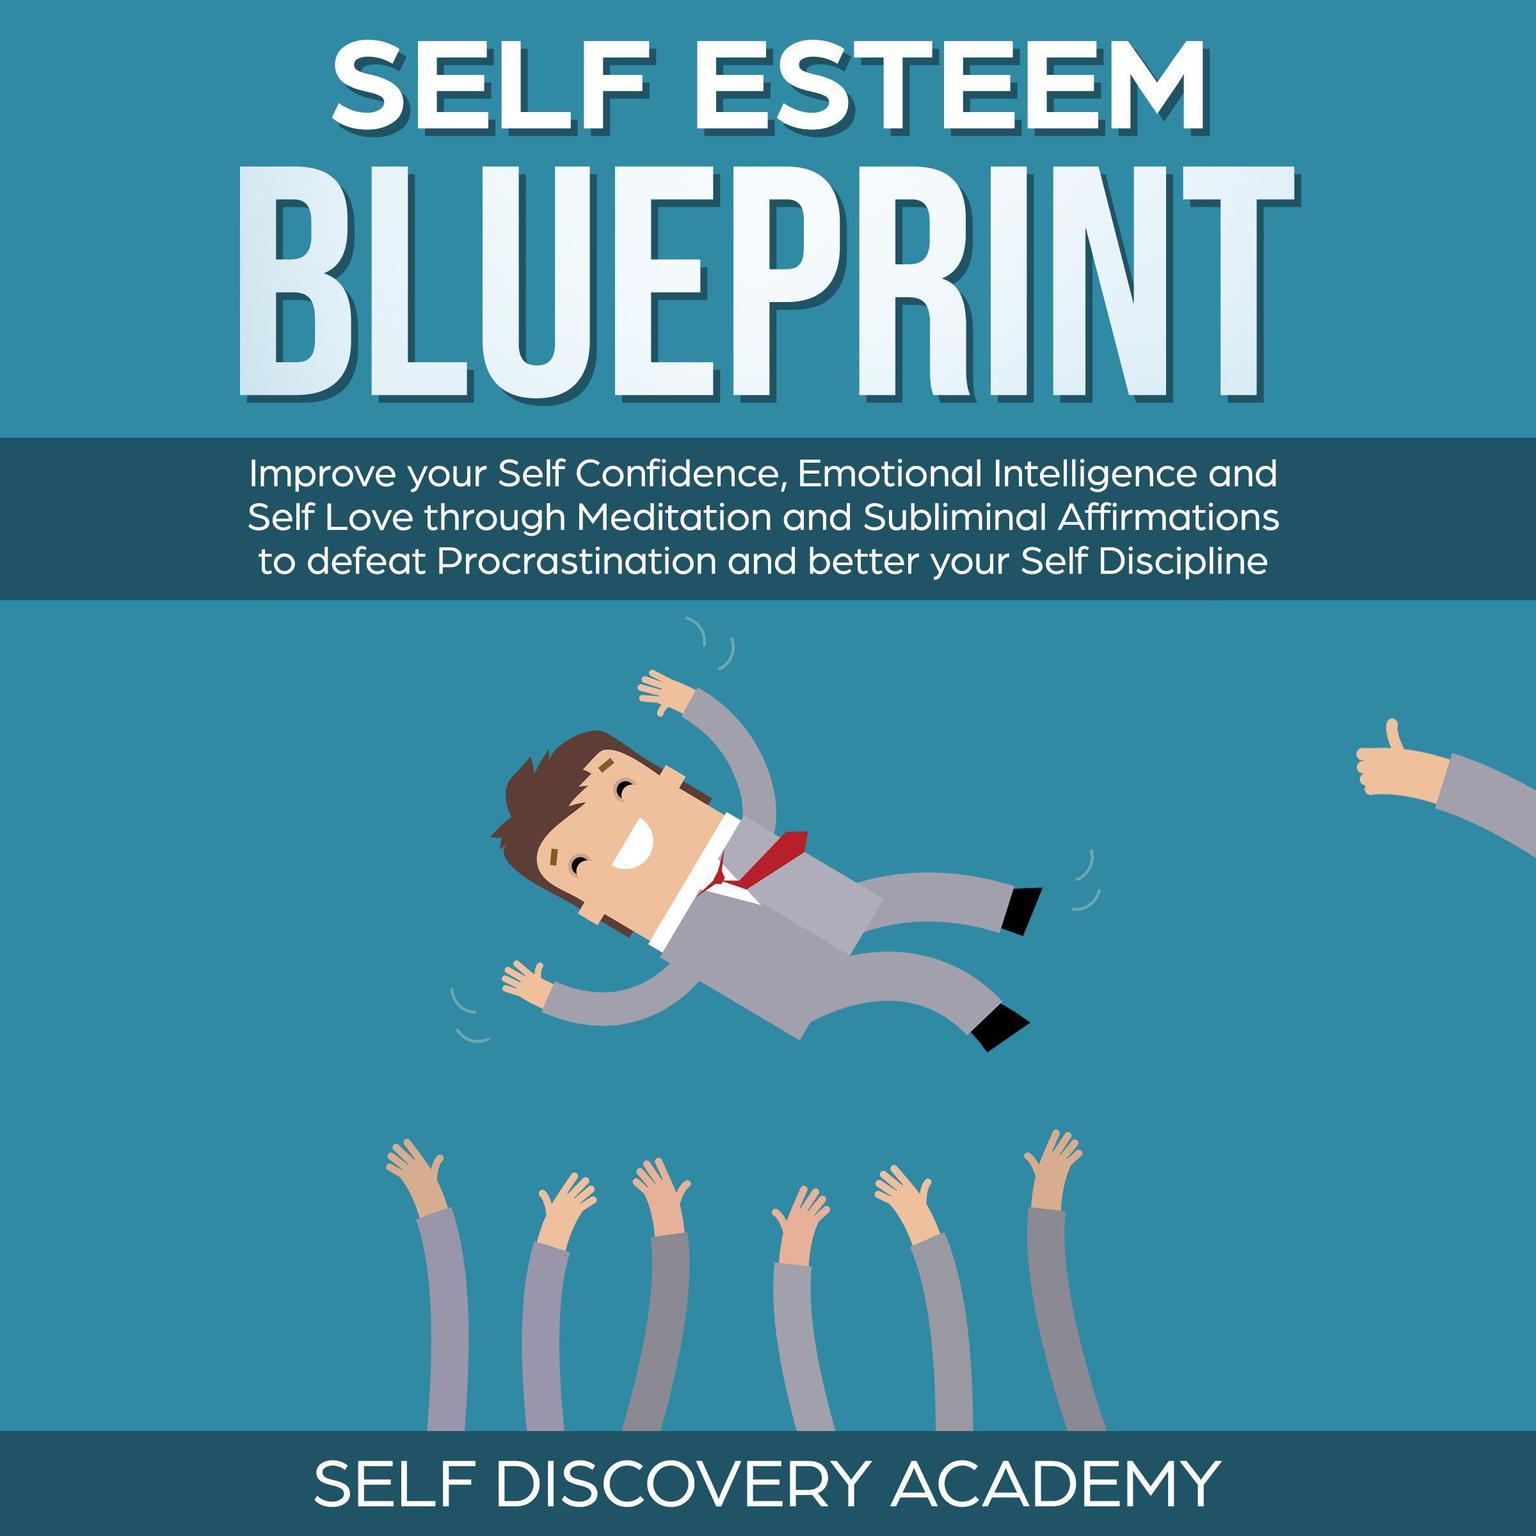 Self Esteem Blueprint: Improve your Self Confidence, Emotional Intelligence and Self Love through Meditation and Subliminal Affirmations to defeat Procrastination and better your Self Discipline (Abridged) Audiobook, by Self Discovery Academy